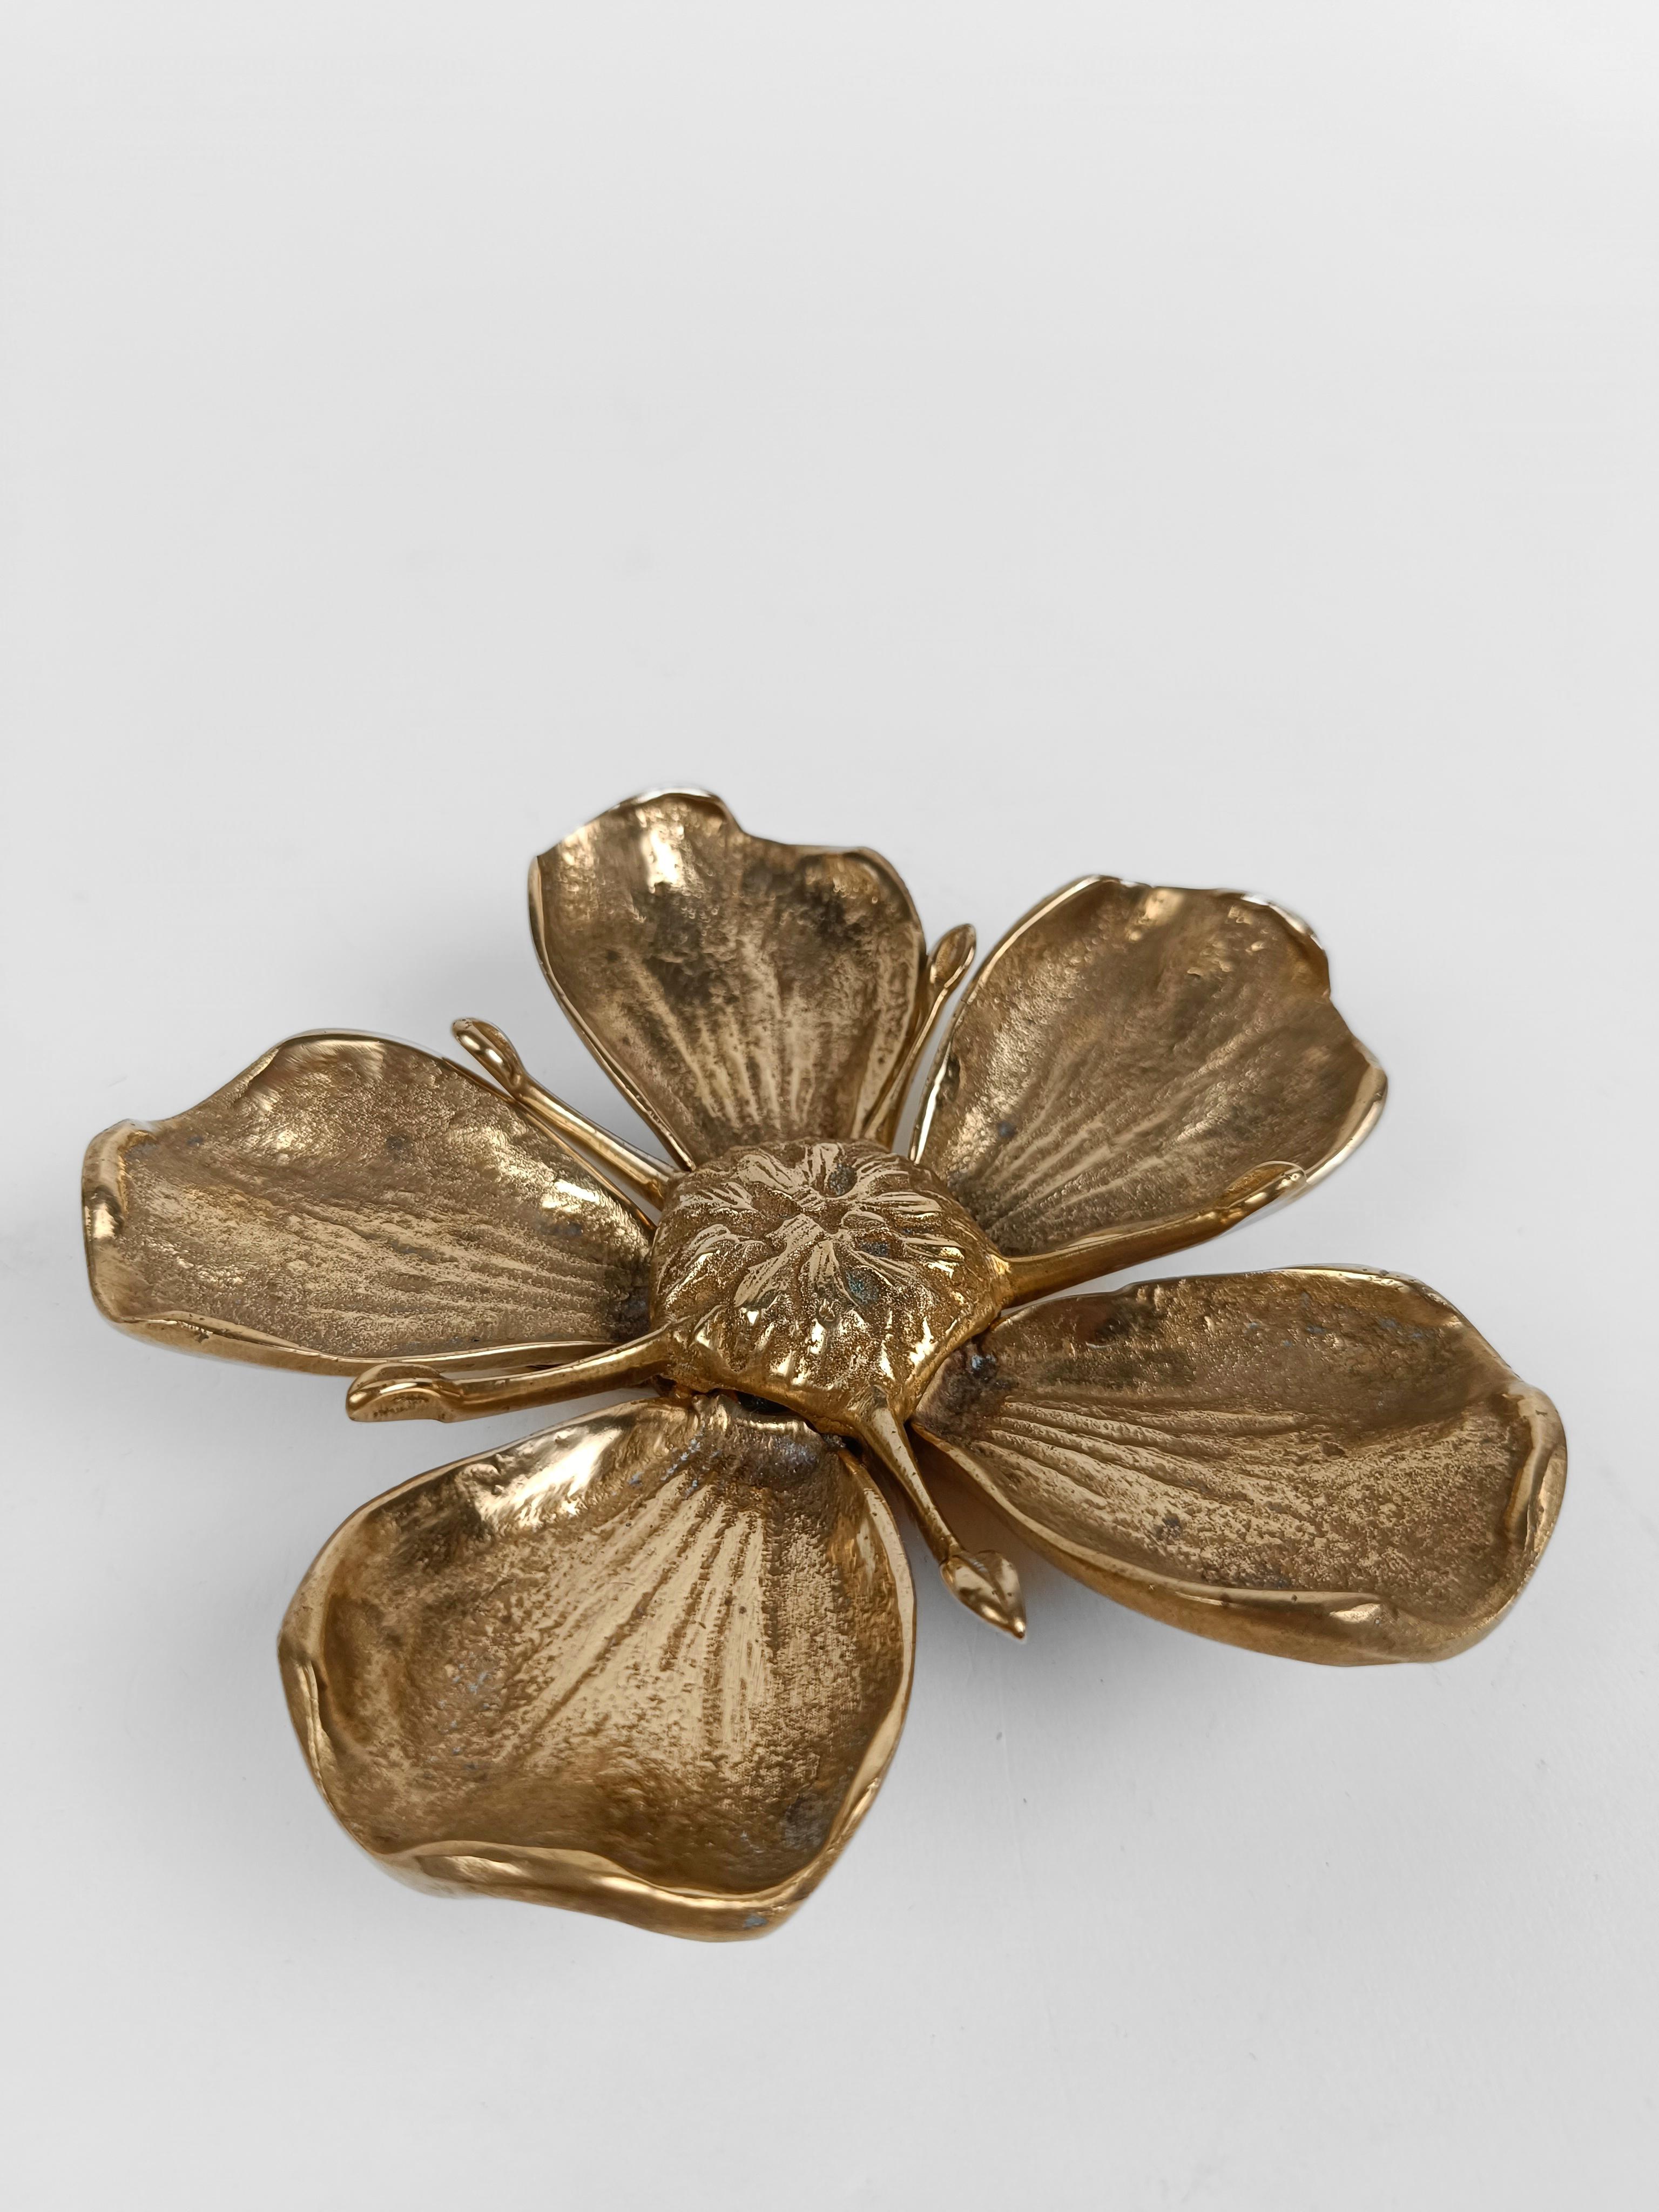 Italian Vintage Brass Metal FLOWER ASHTRAY in the style of Gucci with Removable Petals